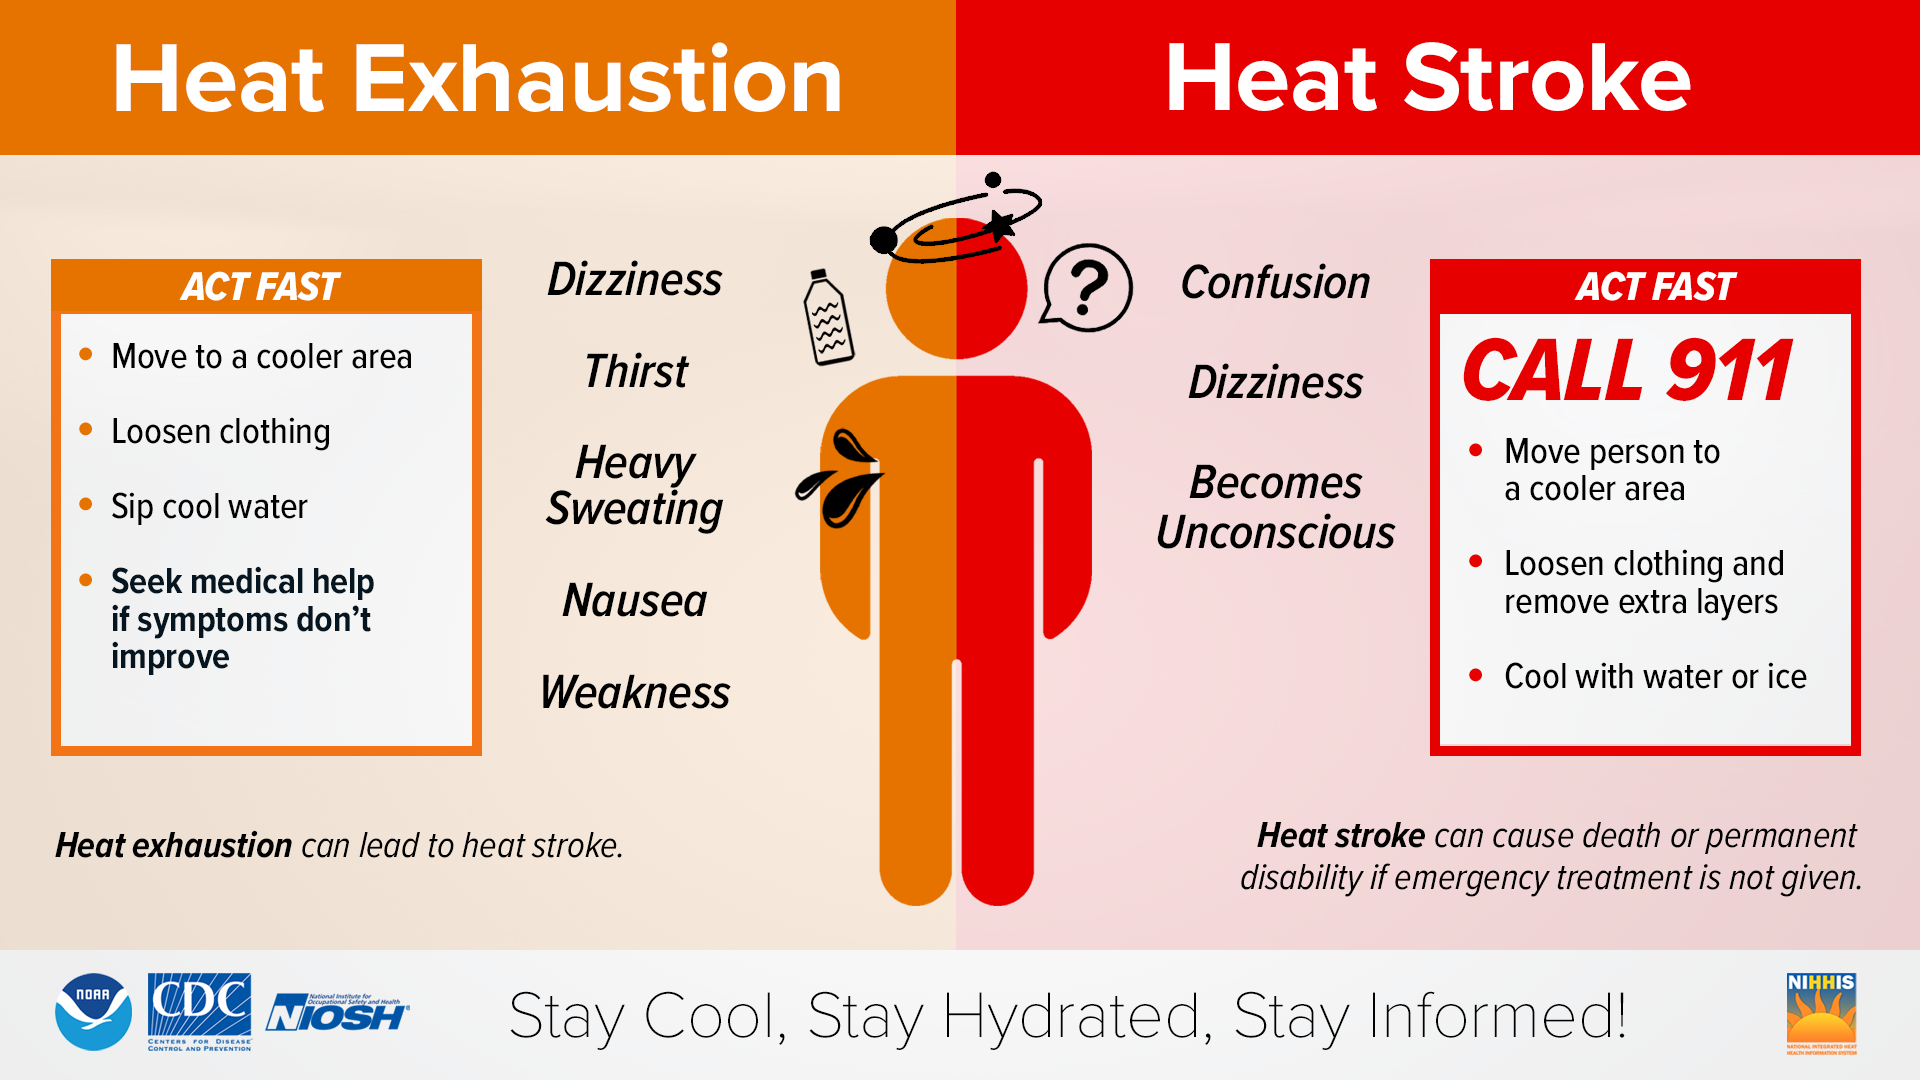 Image depicting heat exhaustion and heat stroke symptoms.